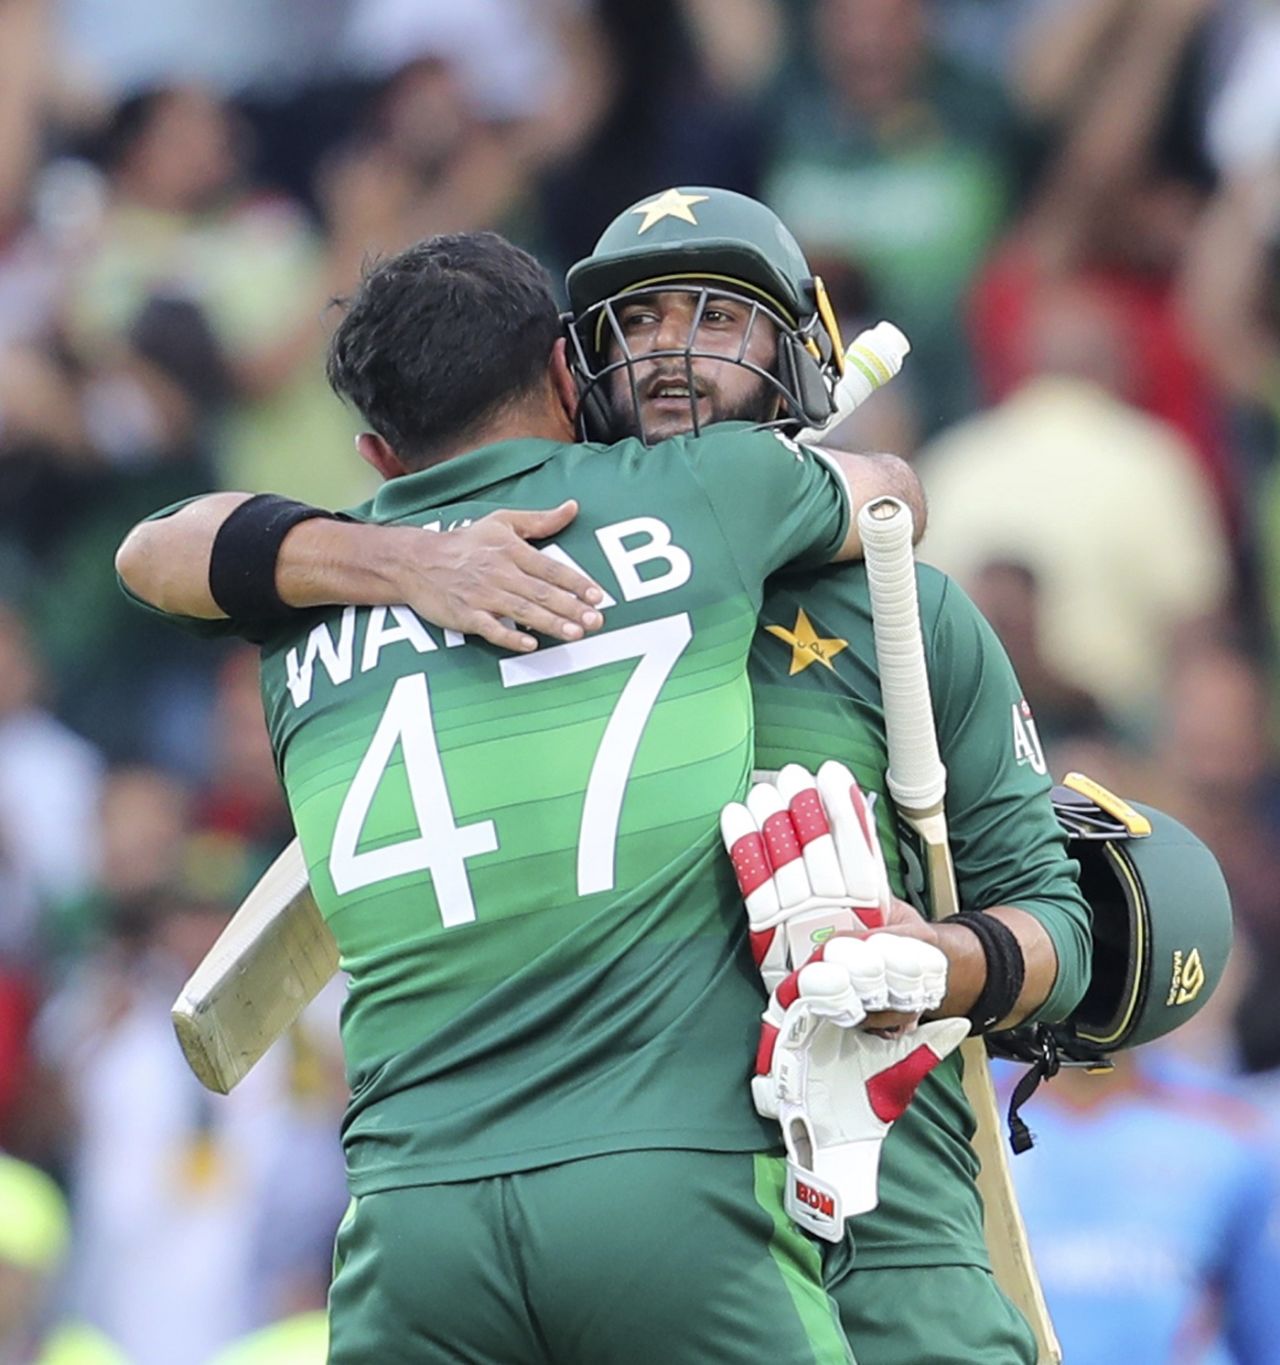 Imad Wasim and Wahab Riaz embrace each other after seeing Pakistan over the line, Afghanistan v Pakistan, World Cup 2019, Headingley, June 29, 2019